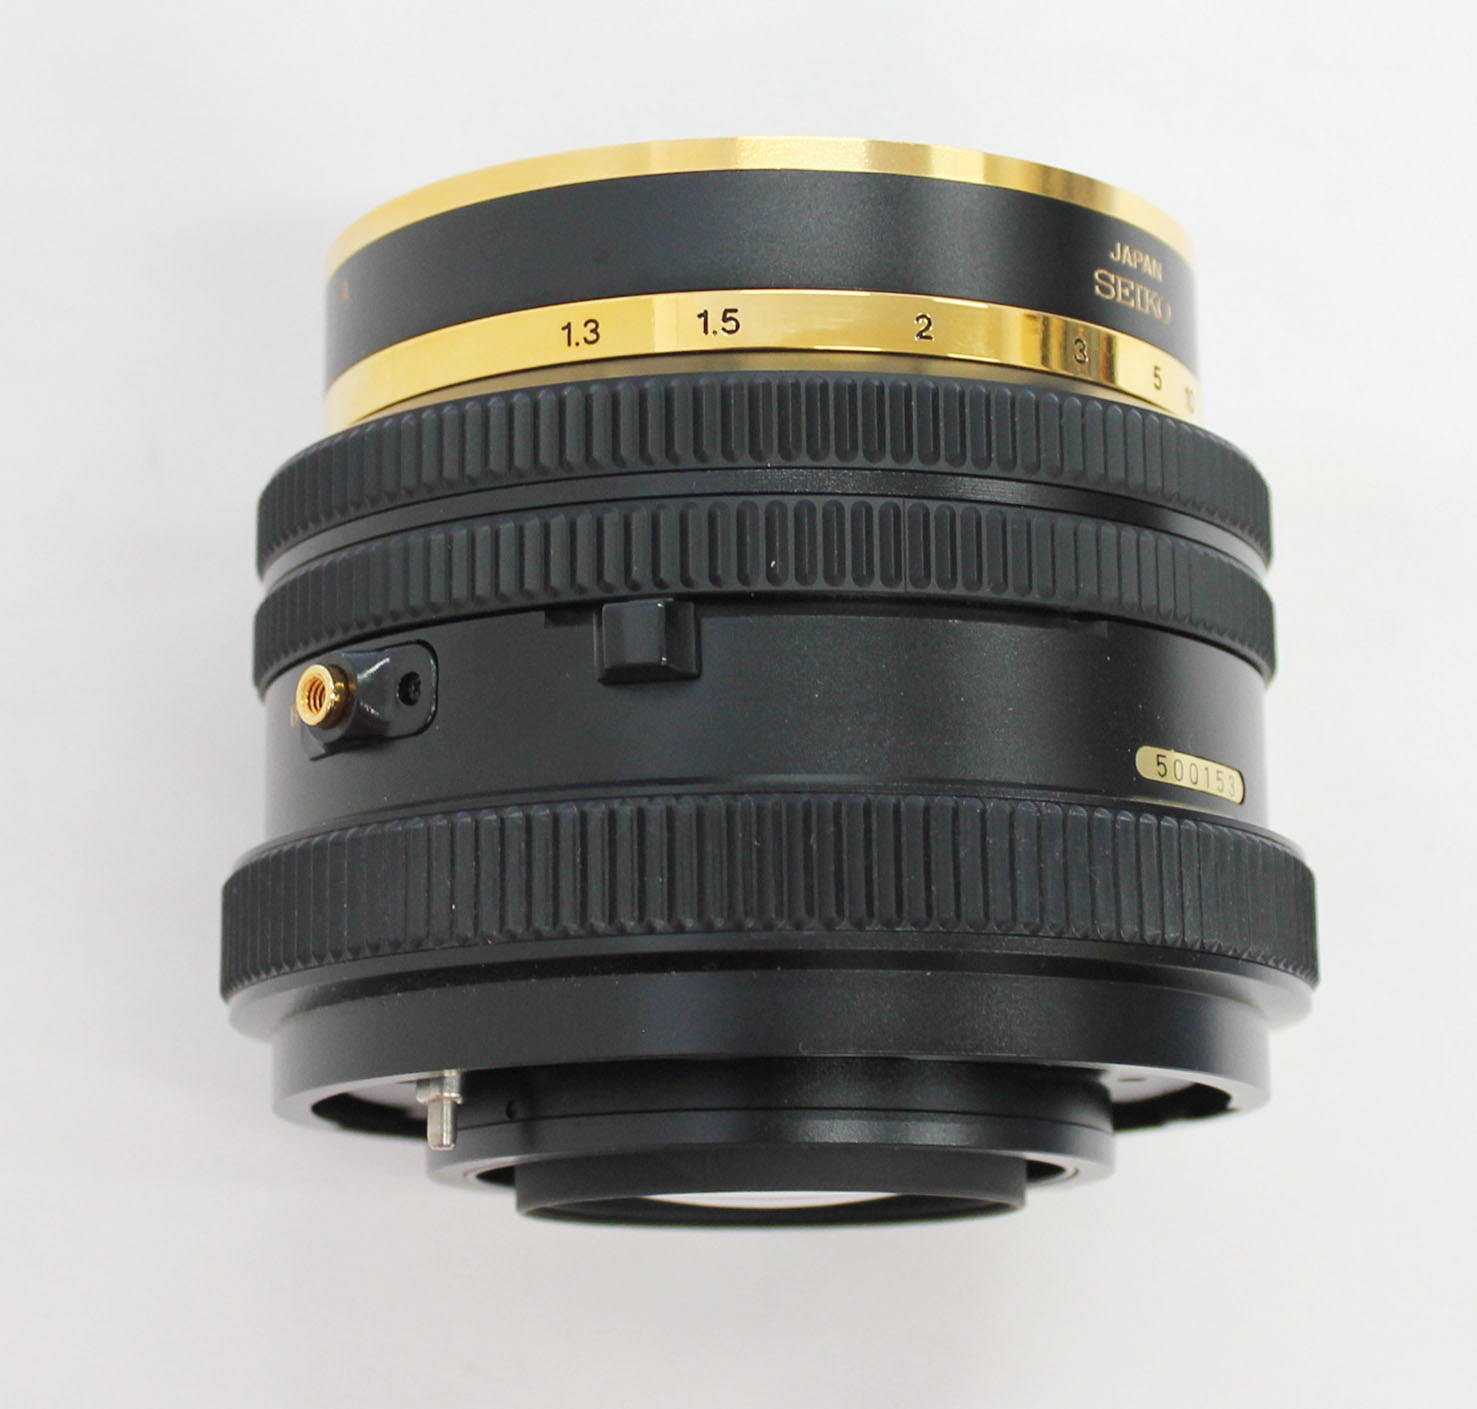 Mamiya RB67 Pro SD Gold K/L 127mm F/3.5 50 Years Limited Edition of 300 from Japan Photo 16